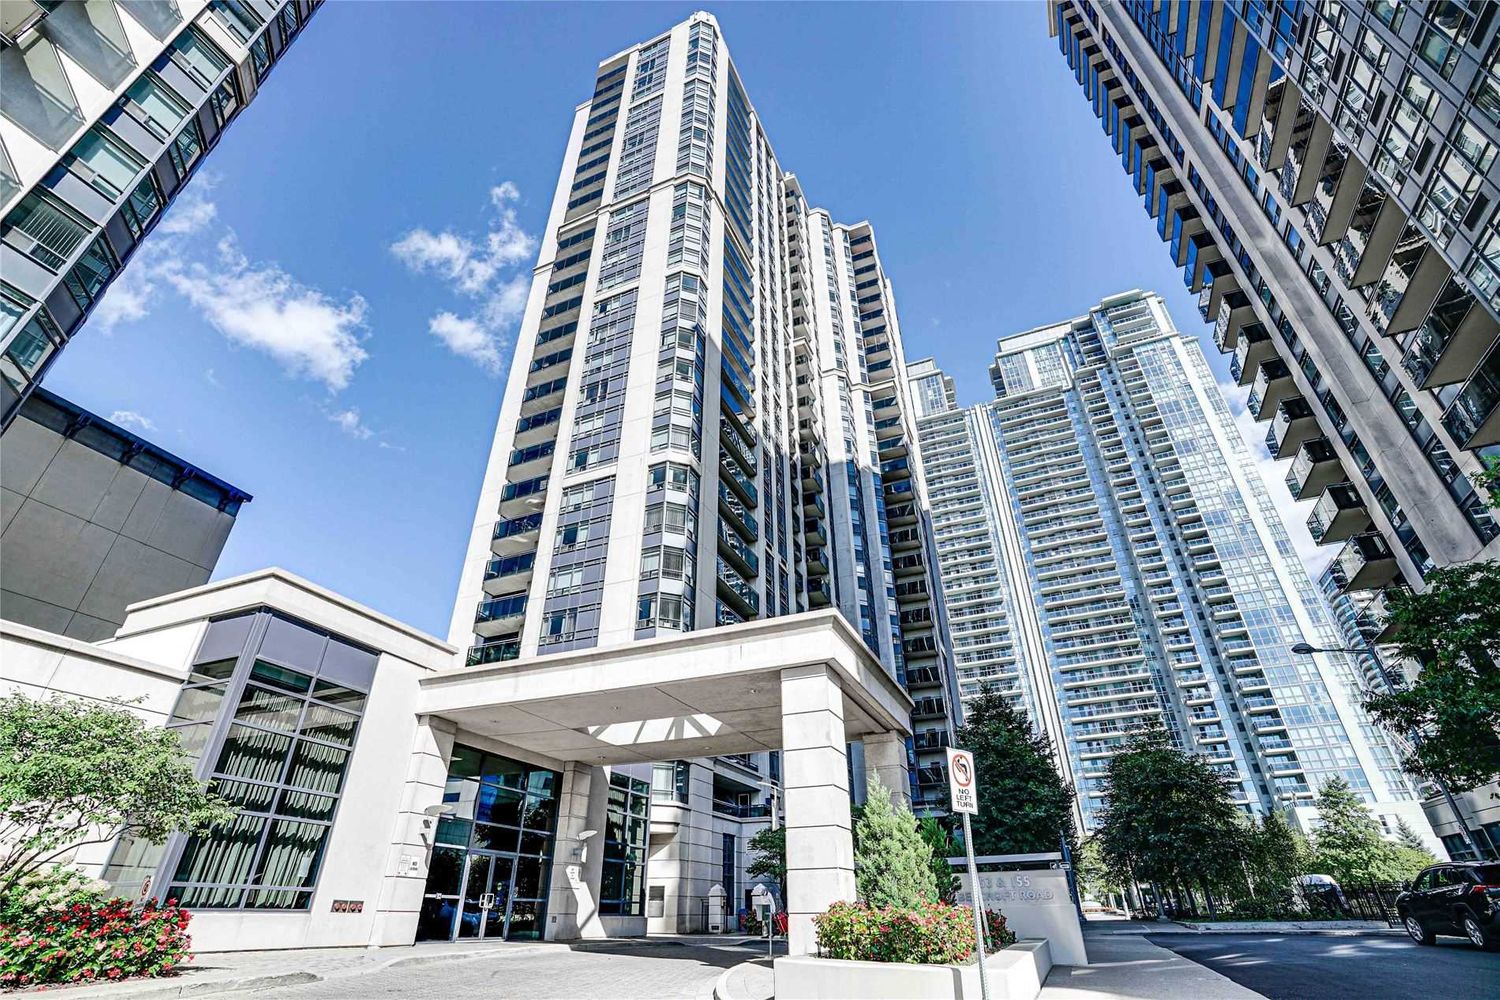 155 Beecroft Road. Broadway II Residences is located in  North York, Toronto - image #1 of 2